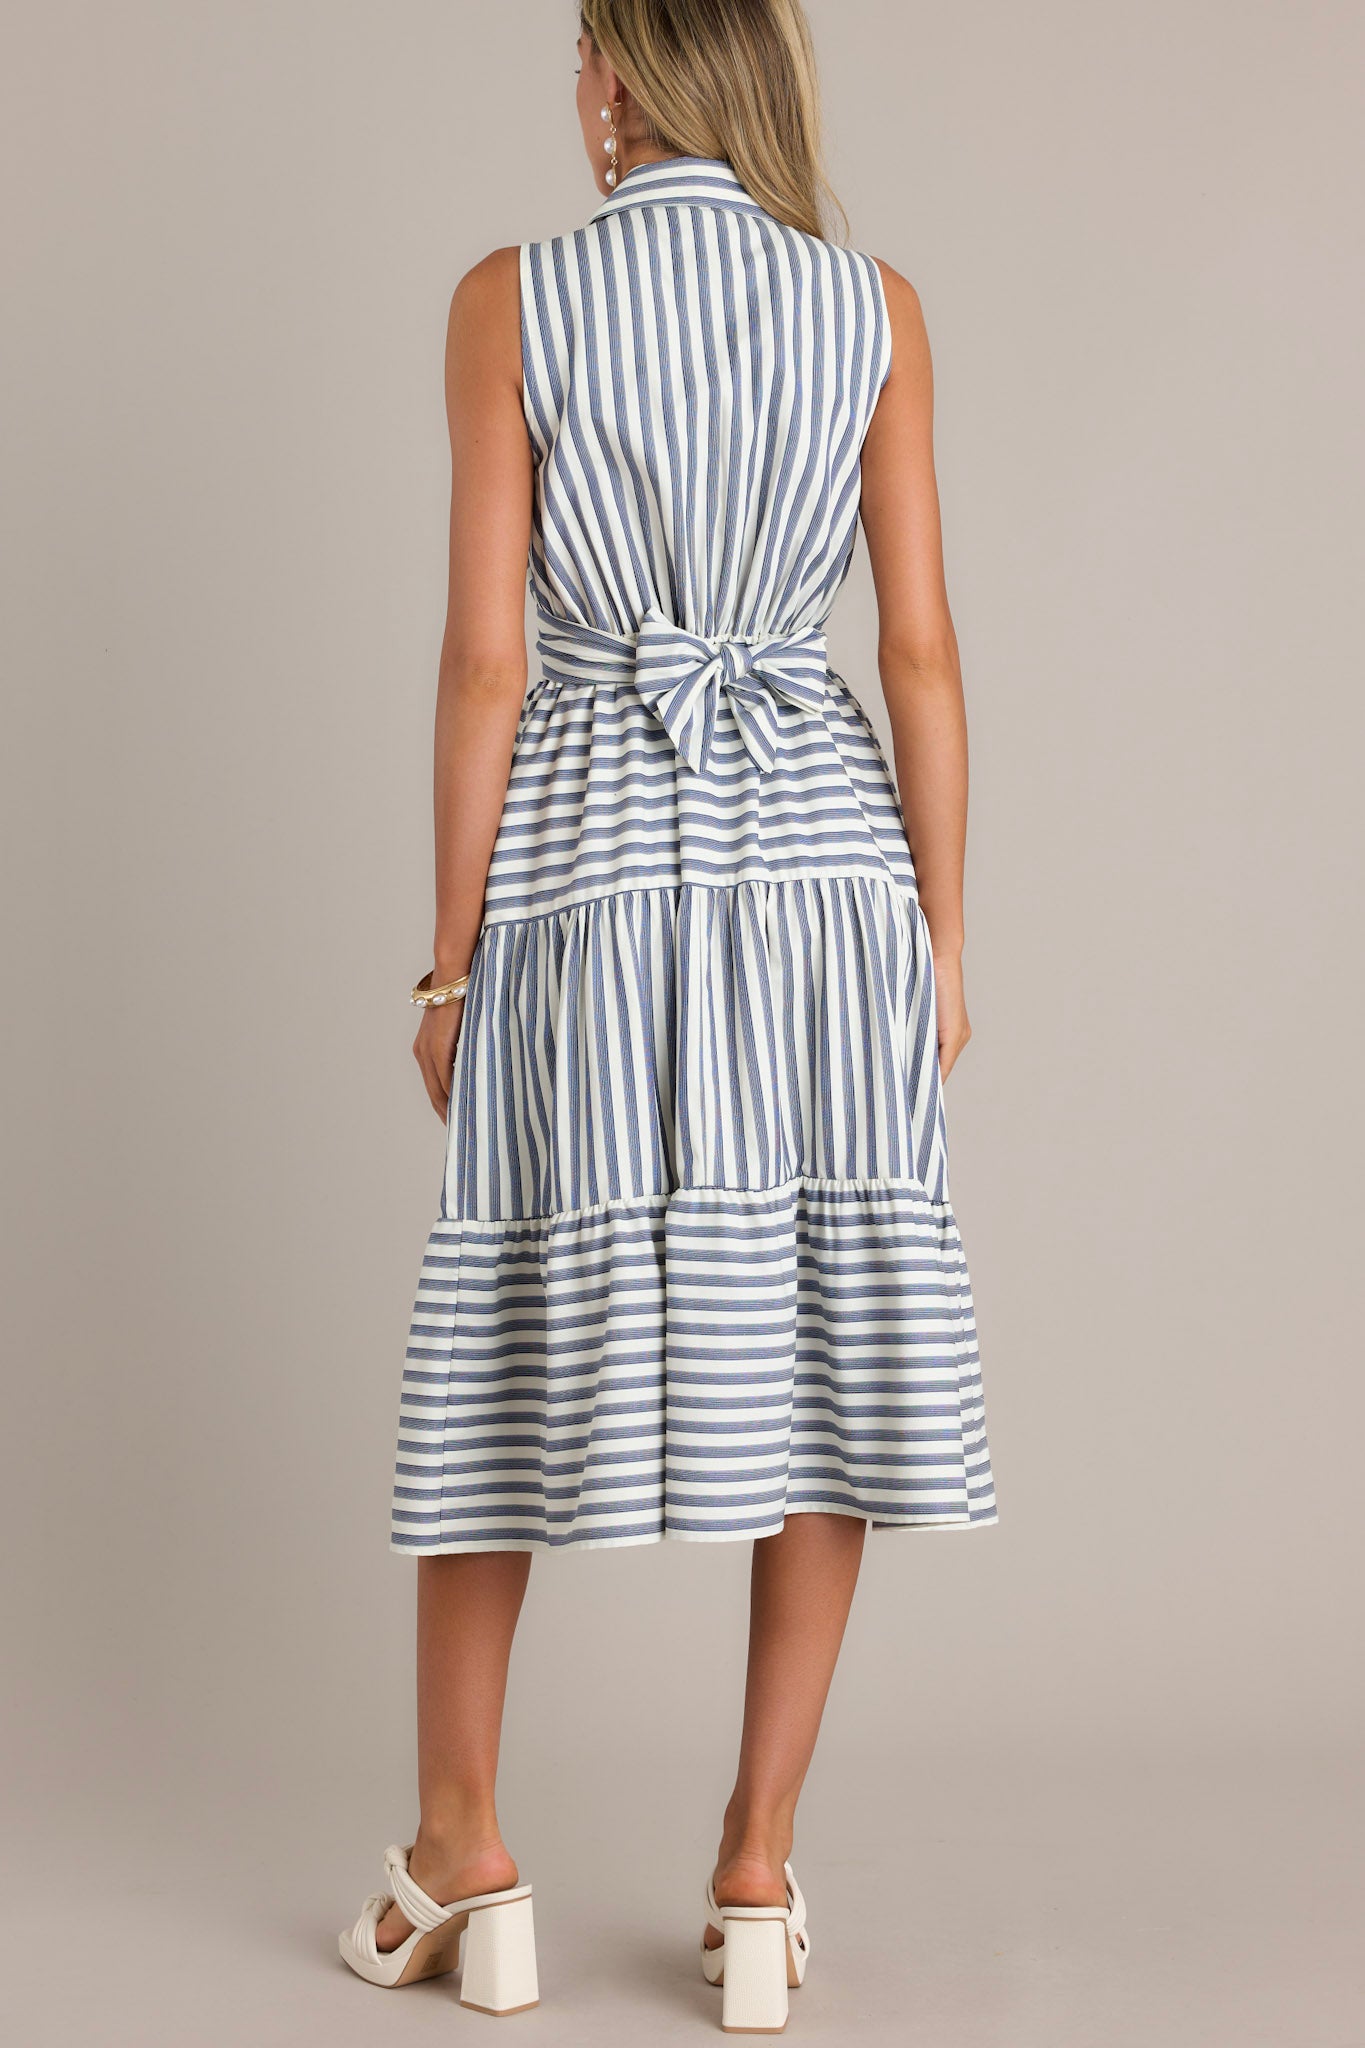 Back view of this navy stripe midi dress that features a collared v-neckline, a self-tie waist feature that can be in the front or back, an elastic waist insert, functional hip pockets, and a sleeveless design.